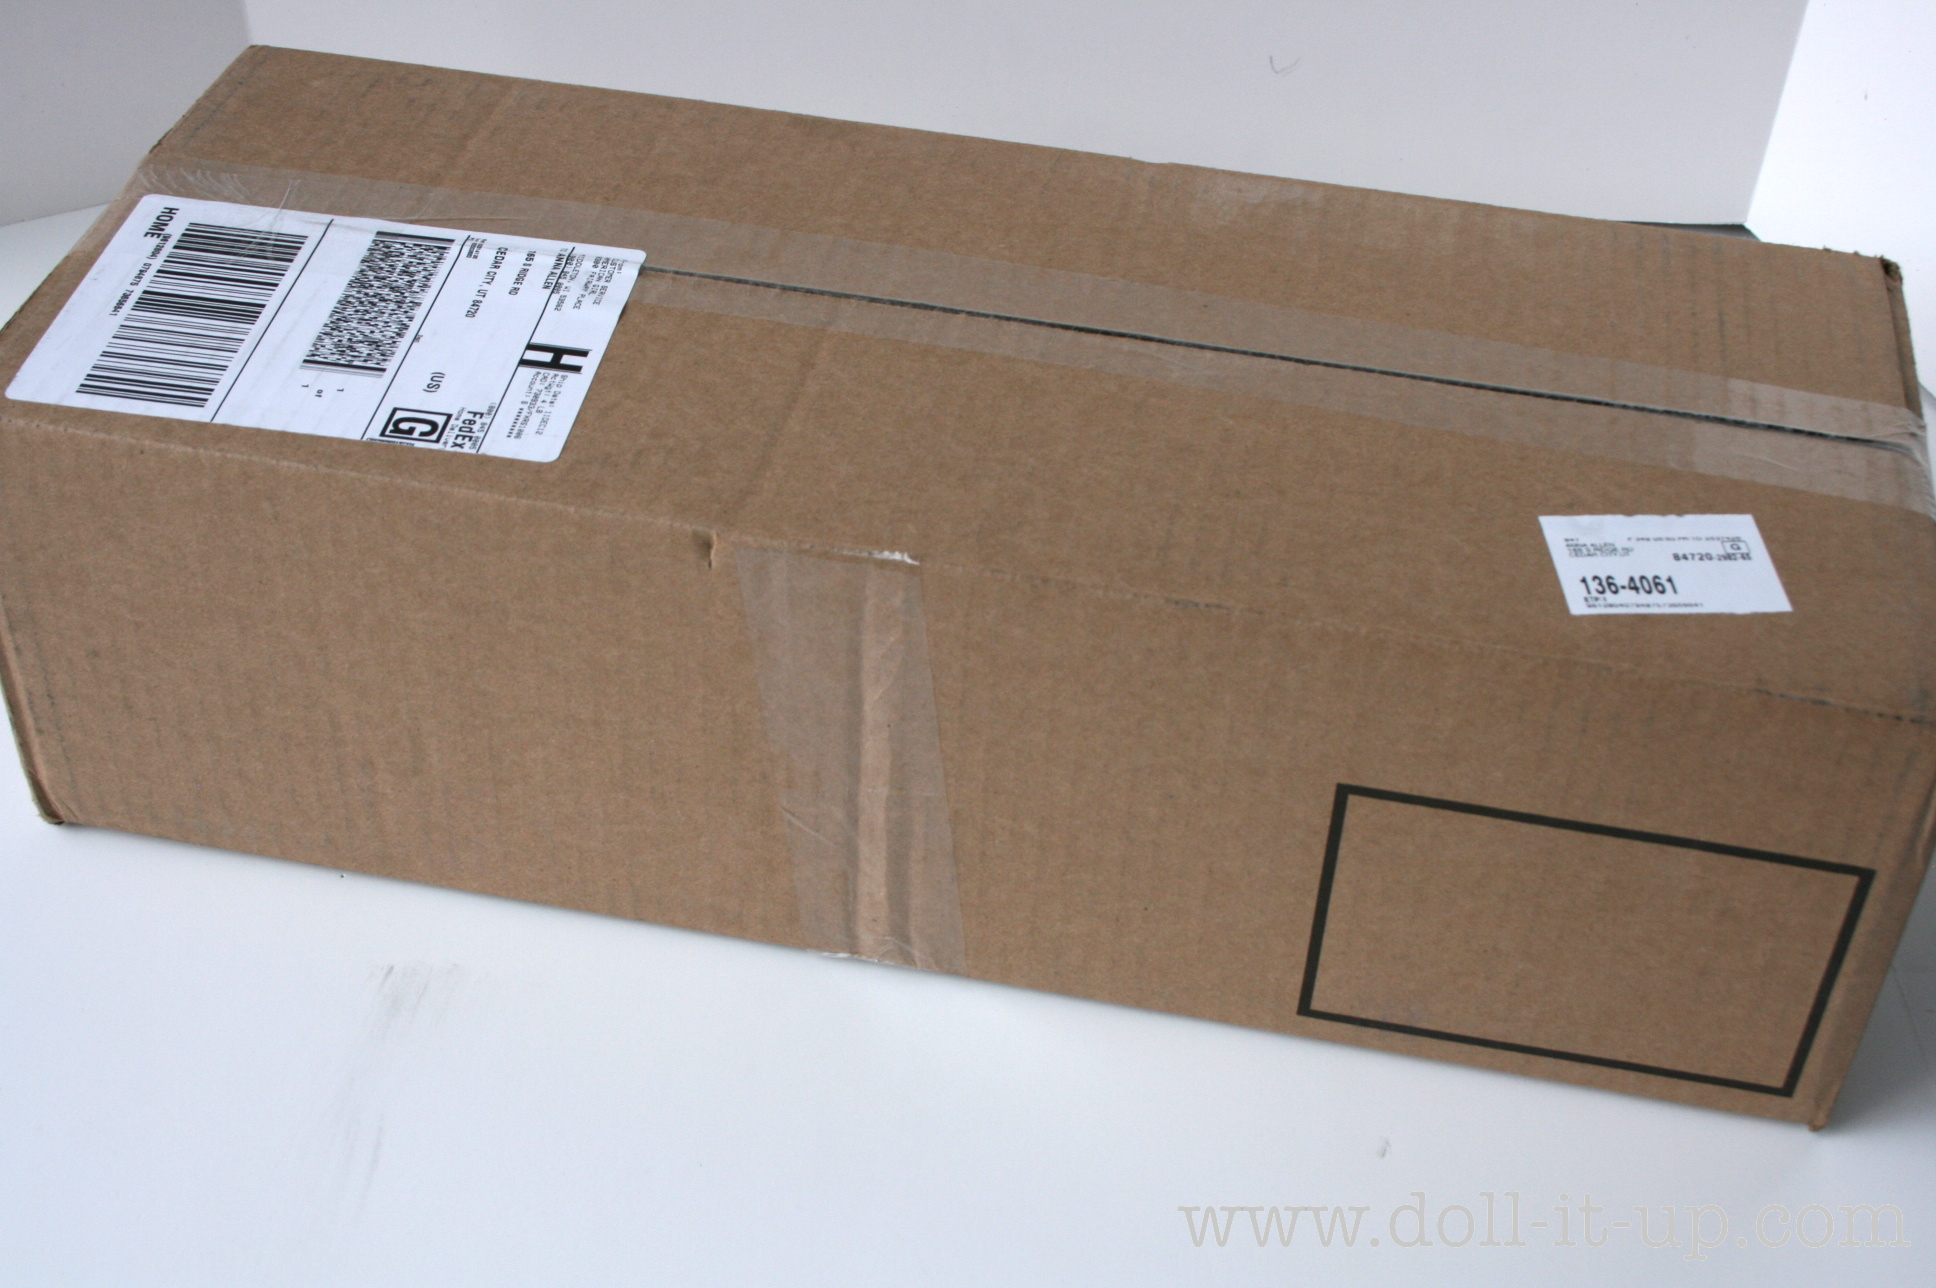 18 inch doll shipping boxes